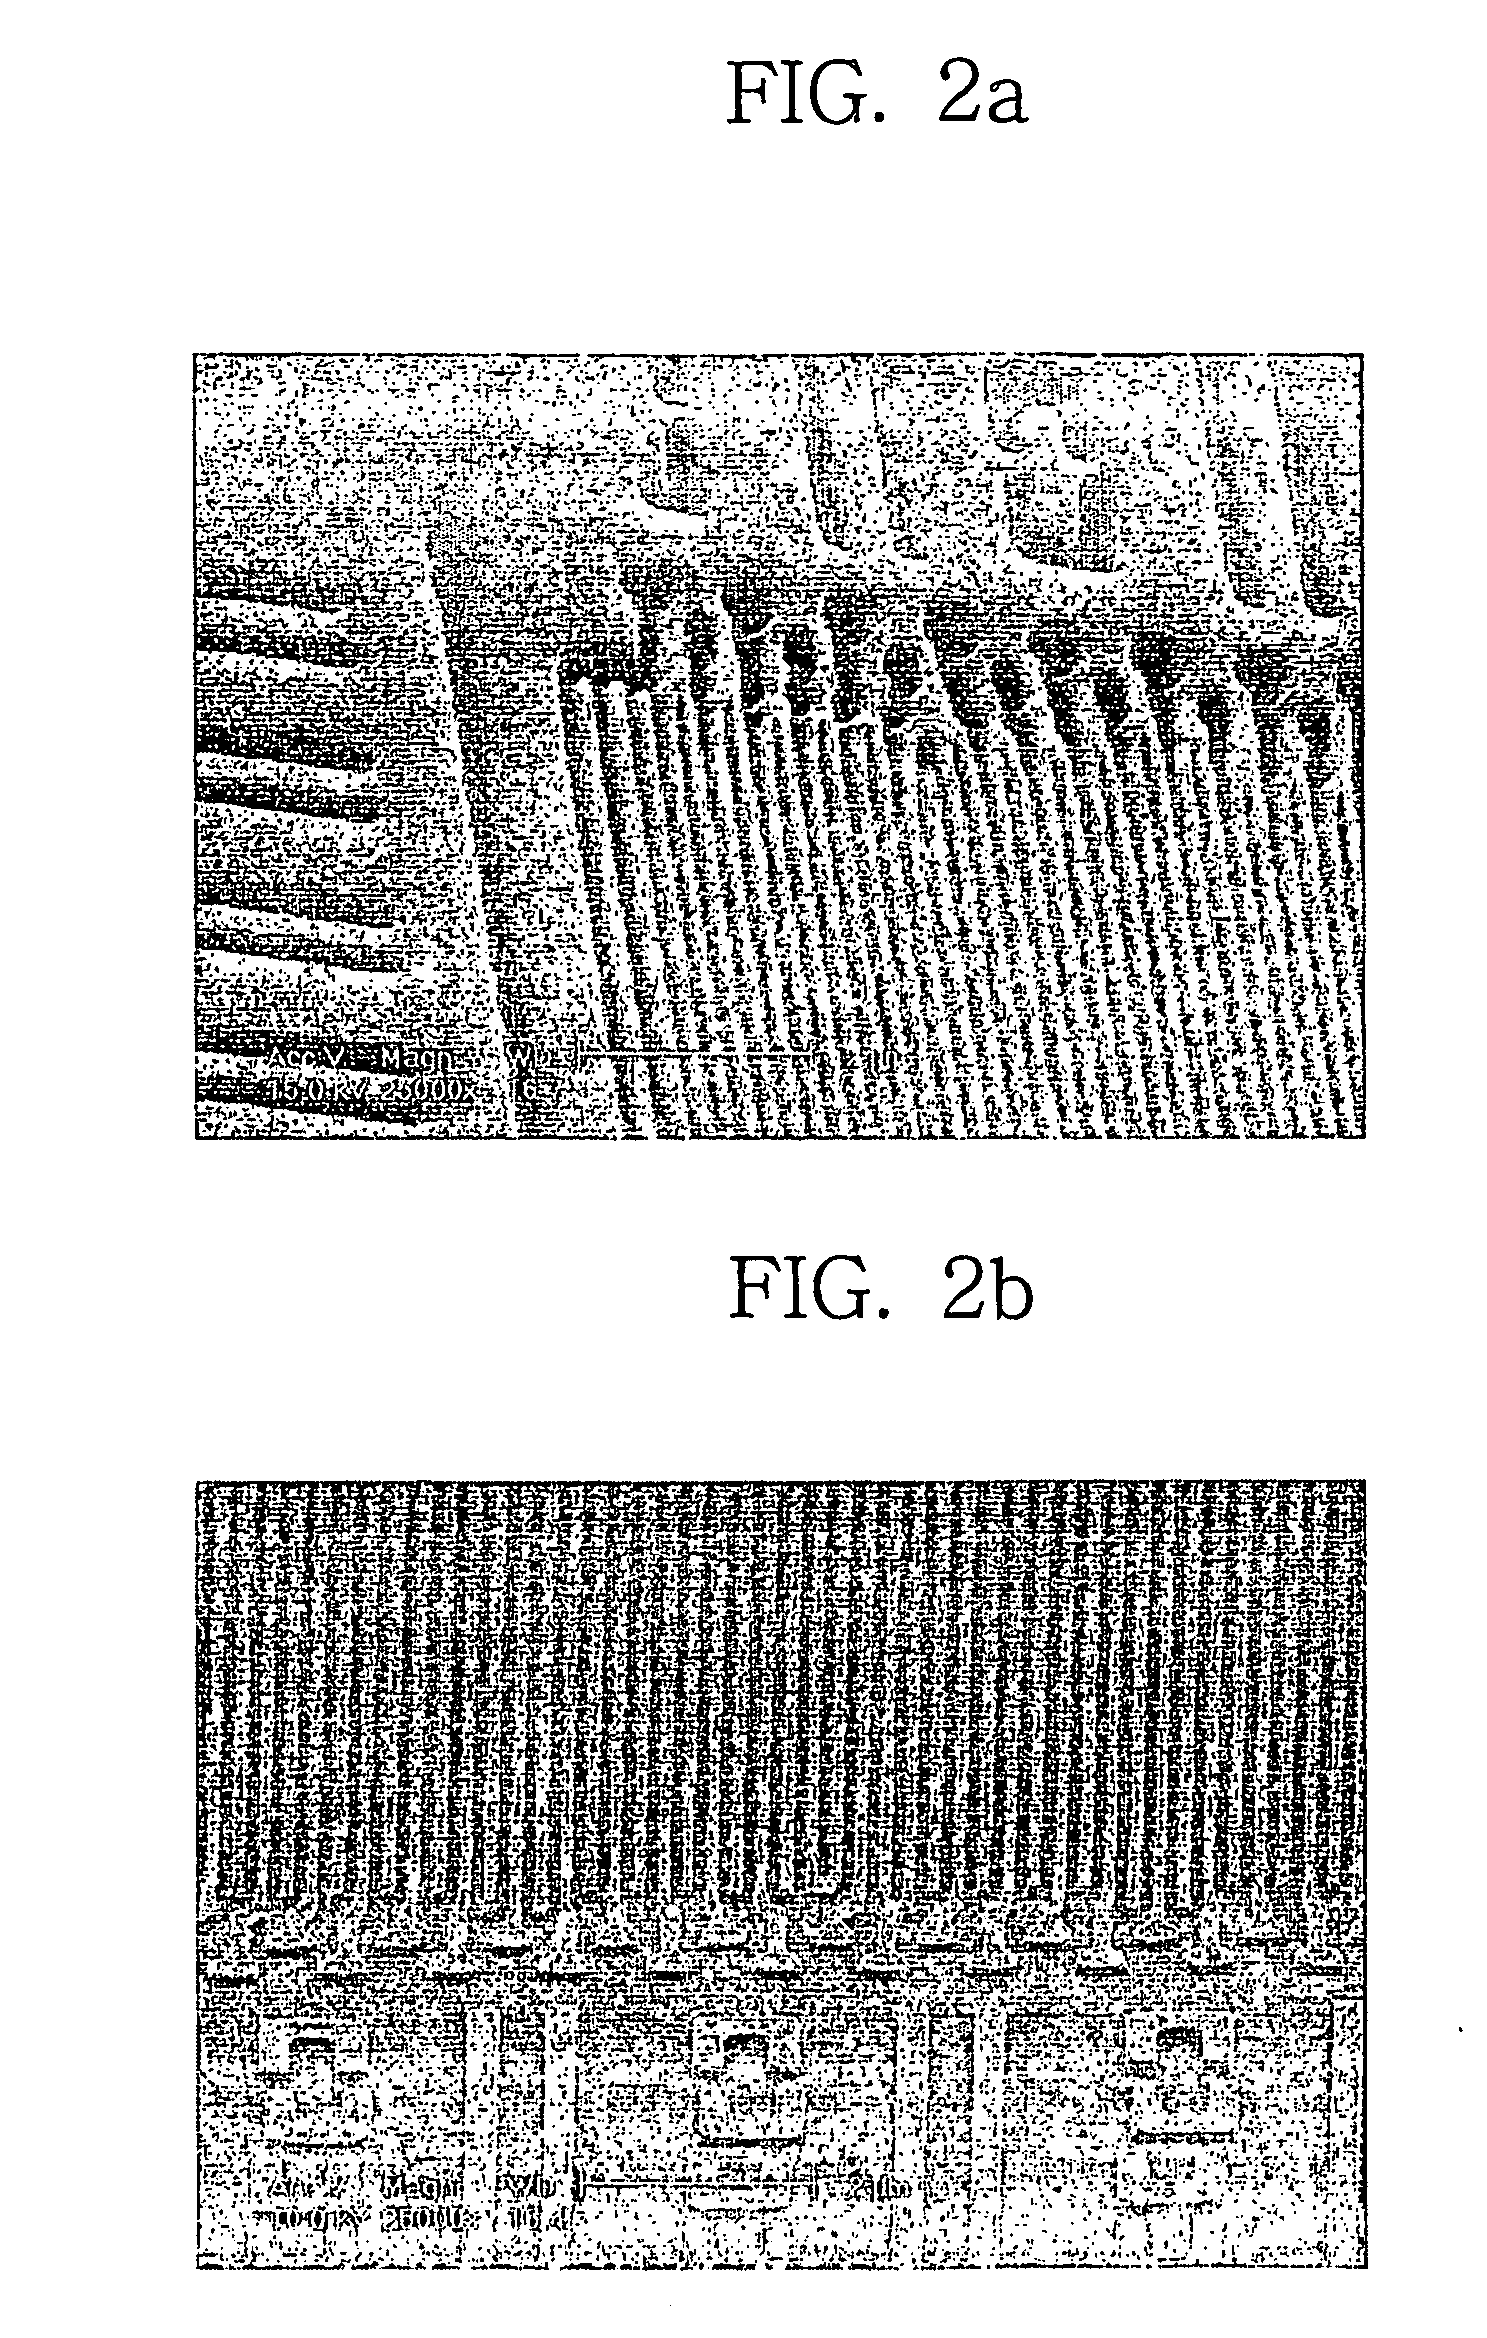 Resin composition for mold used in forming micropattern, and method for fabricating organic mold therefrom